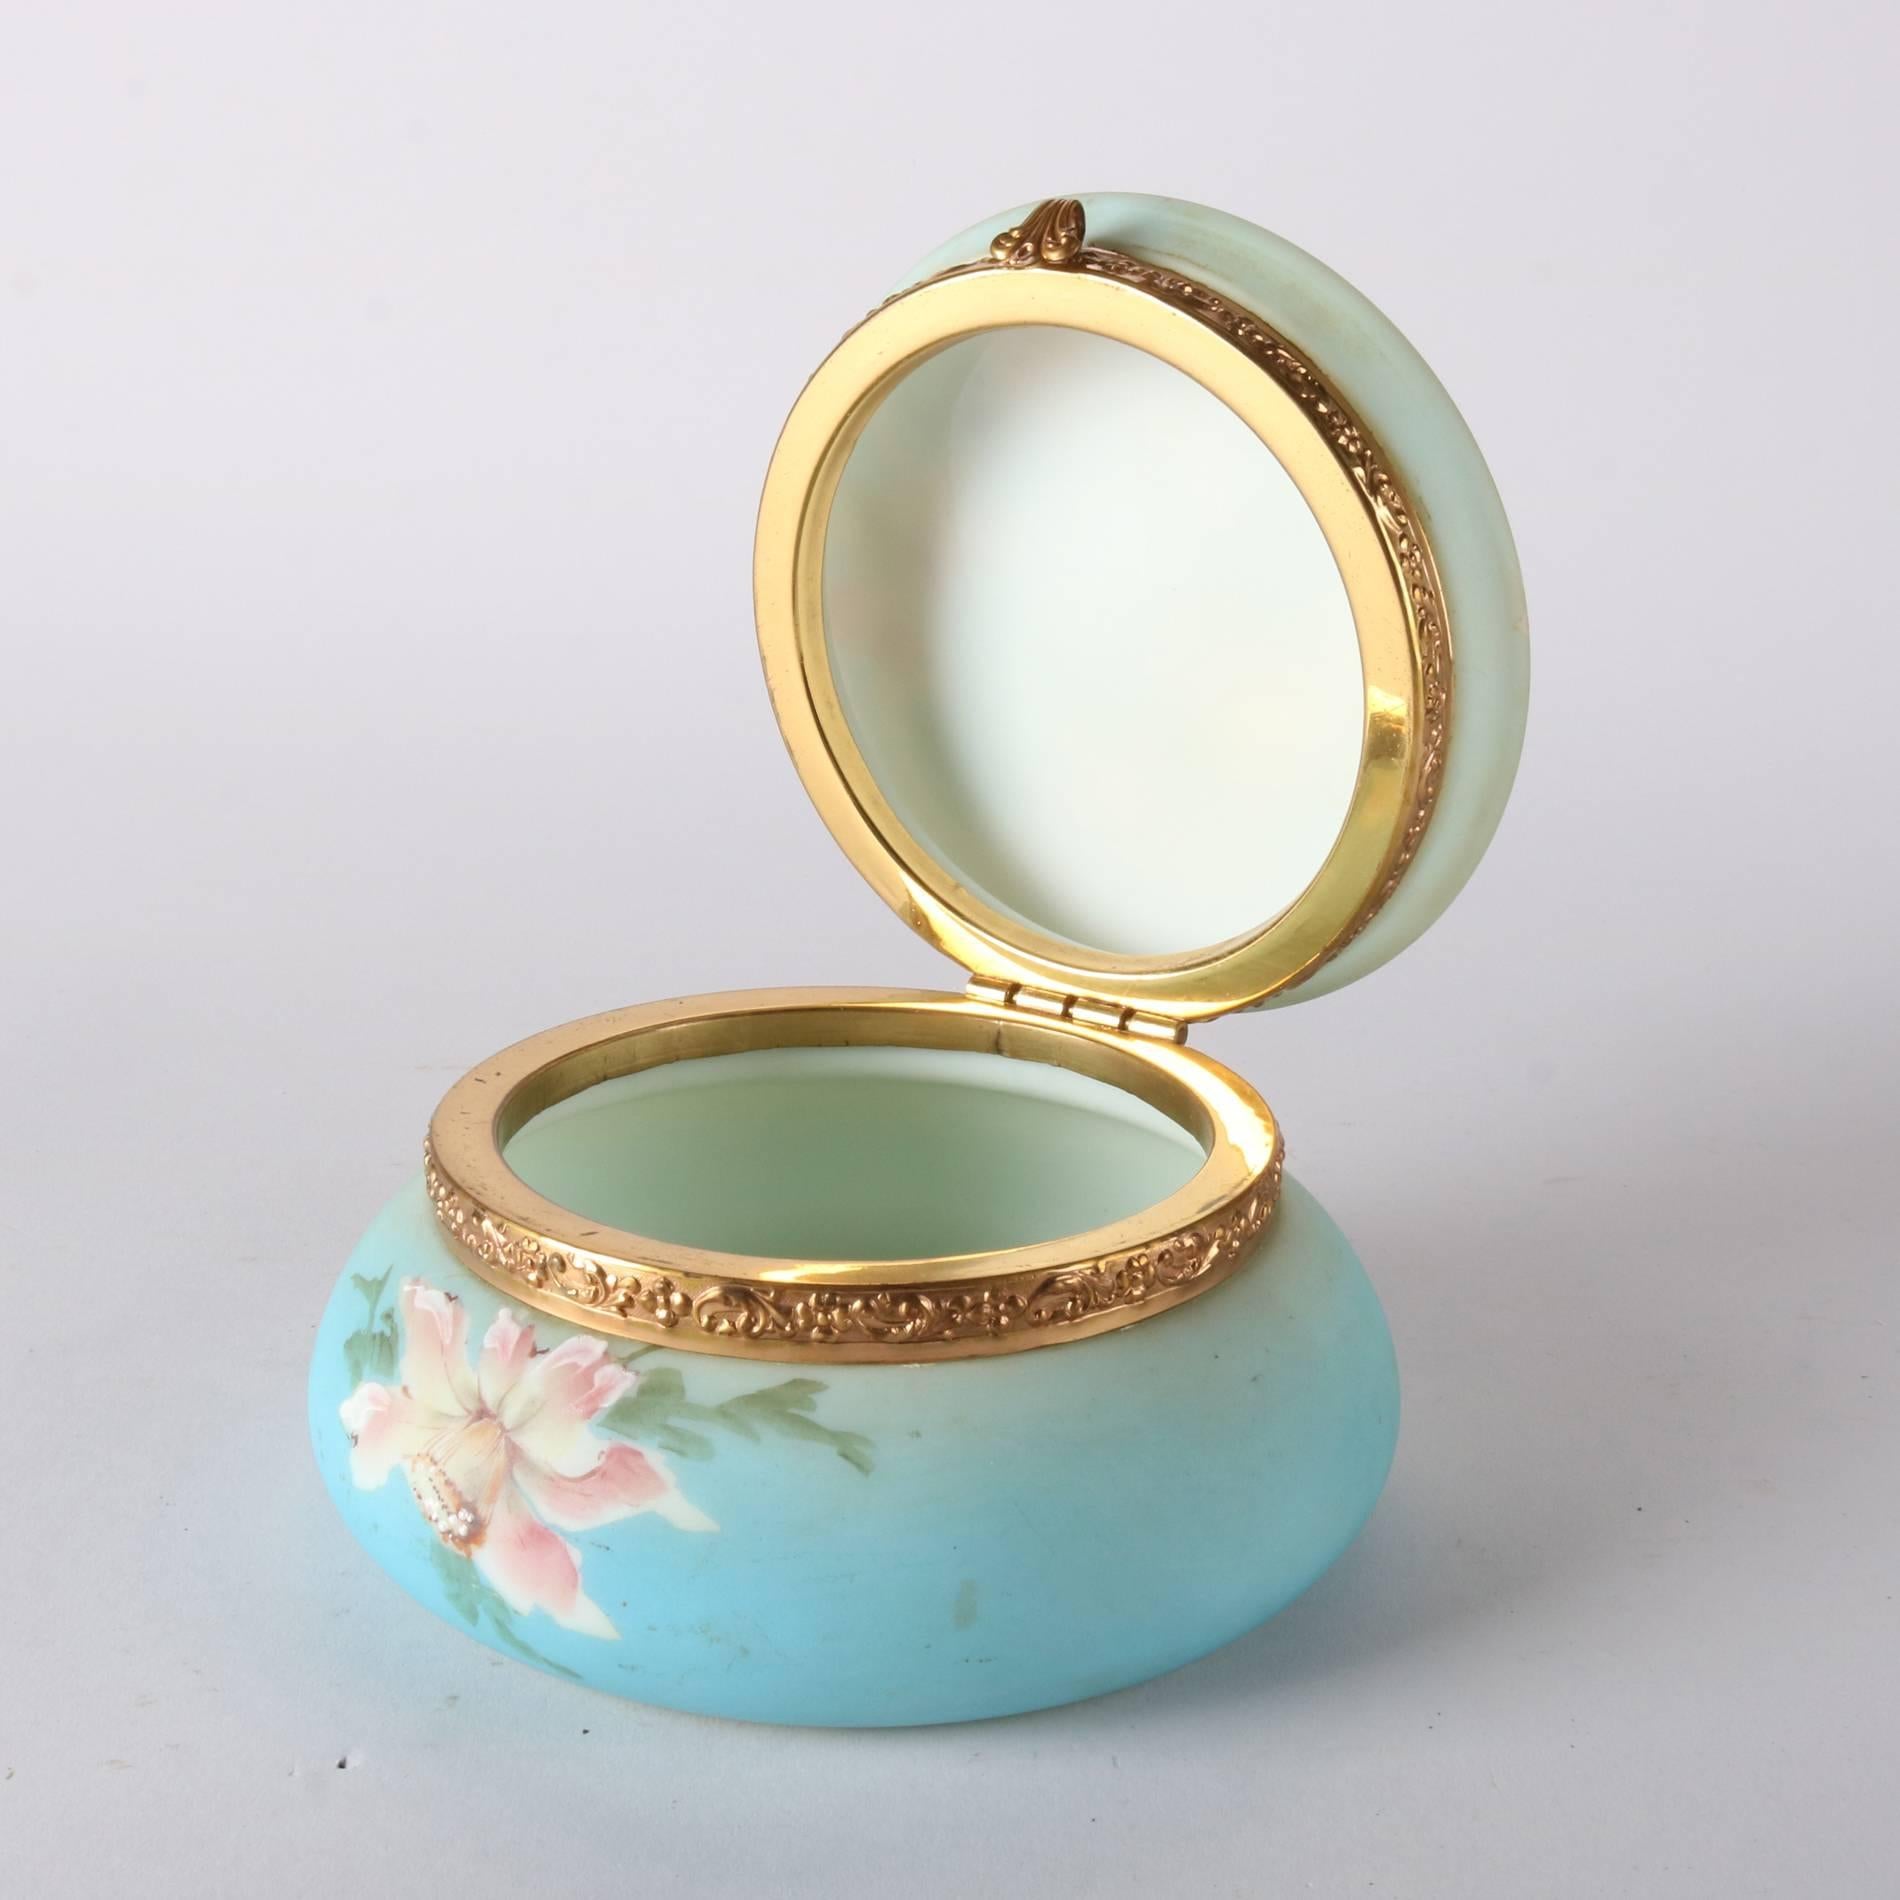 Antique Wavecrest School C.F. Monroe & Co. Nakara opal ware glass dresser jar features hand painted floral decoration, foliate embossed brass attachments, and is stamped on base, 19th century

Measures - 3.5"h x 6"diam